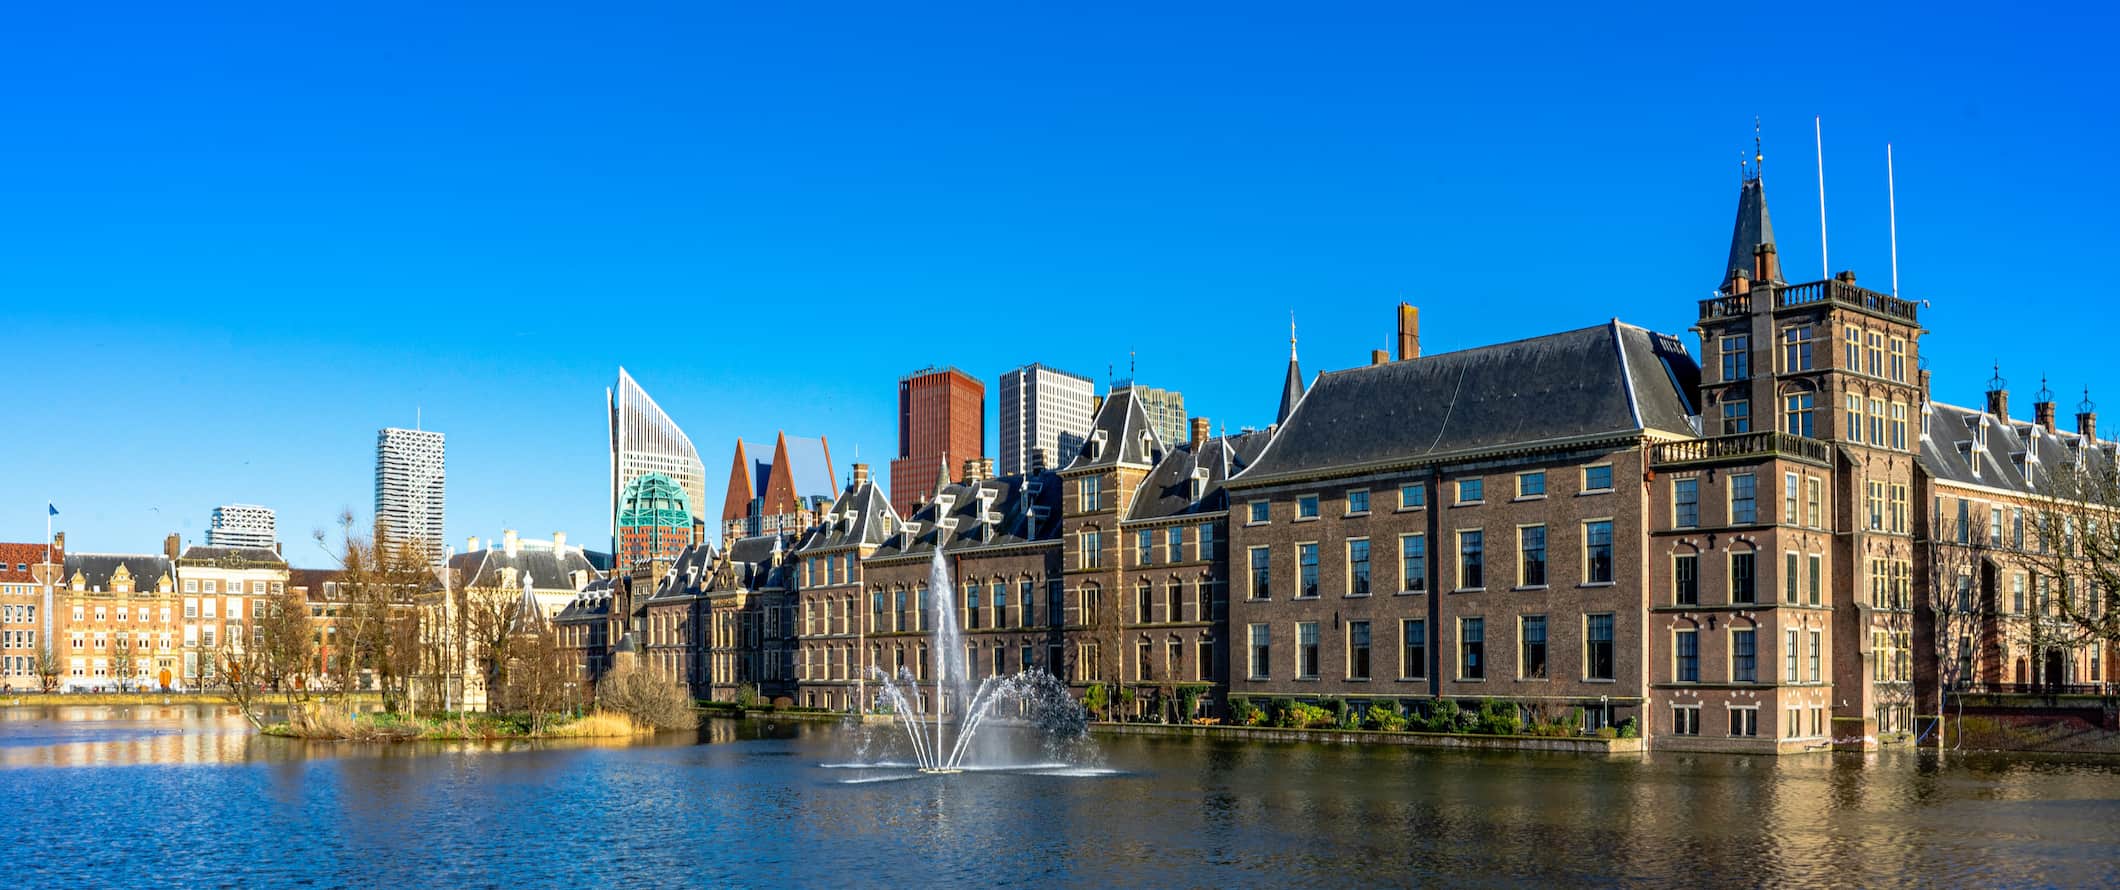 A view of The Hague, in The Netherlands near the water, featuring old buildings on a sunny summer day